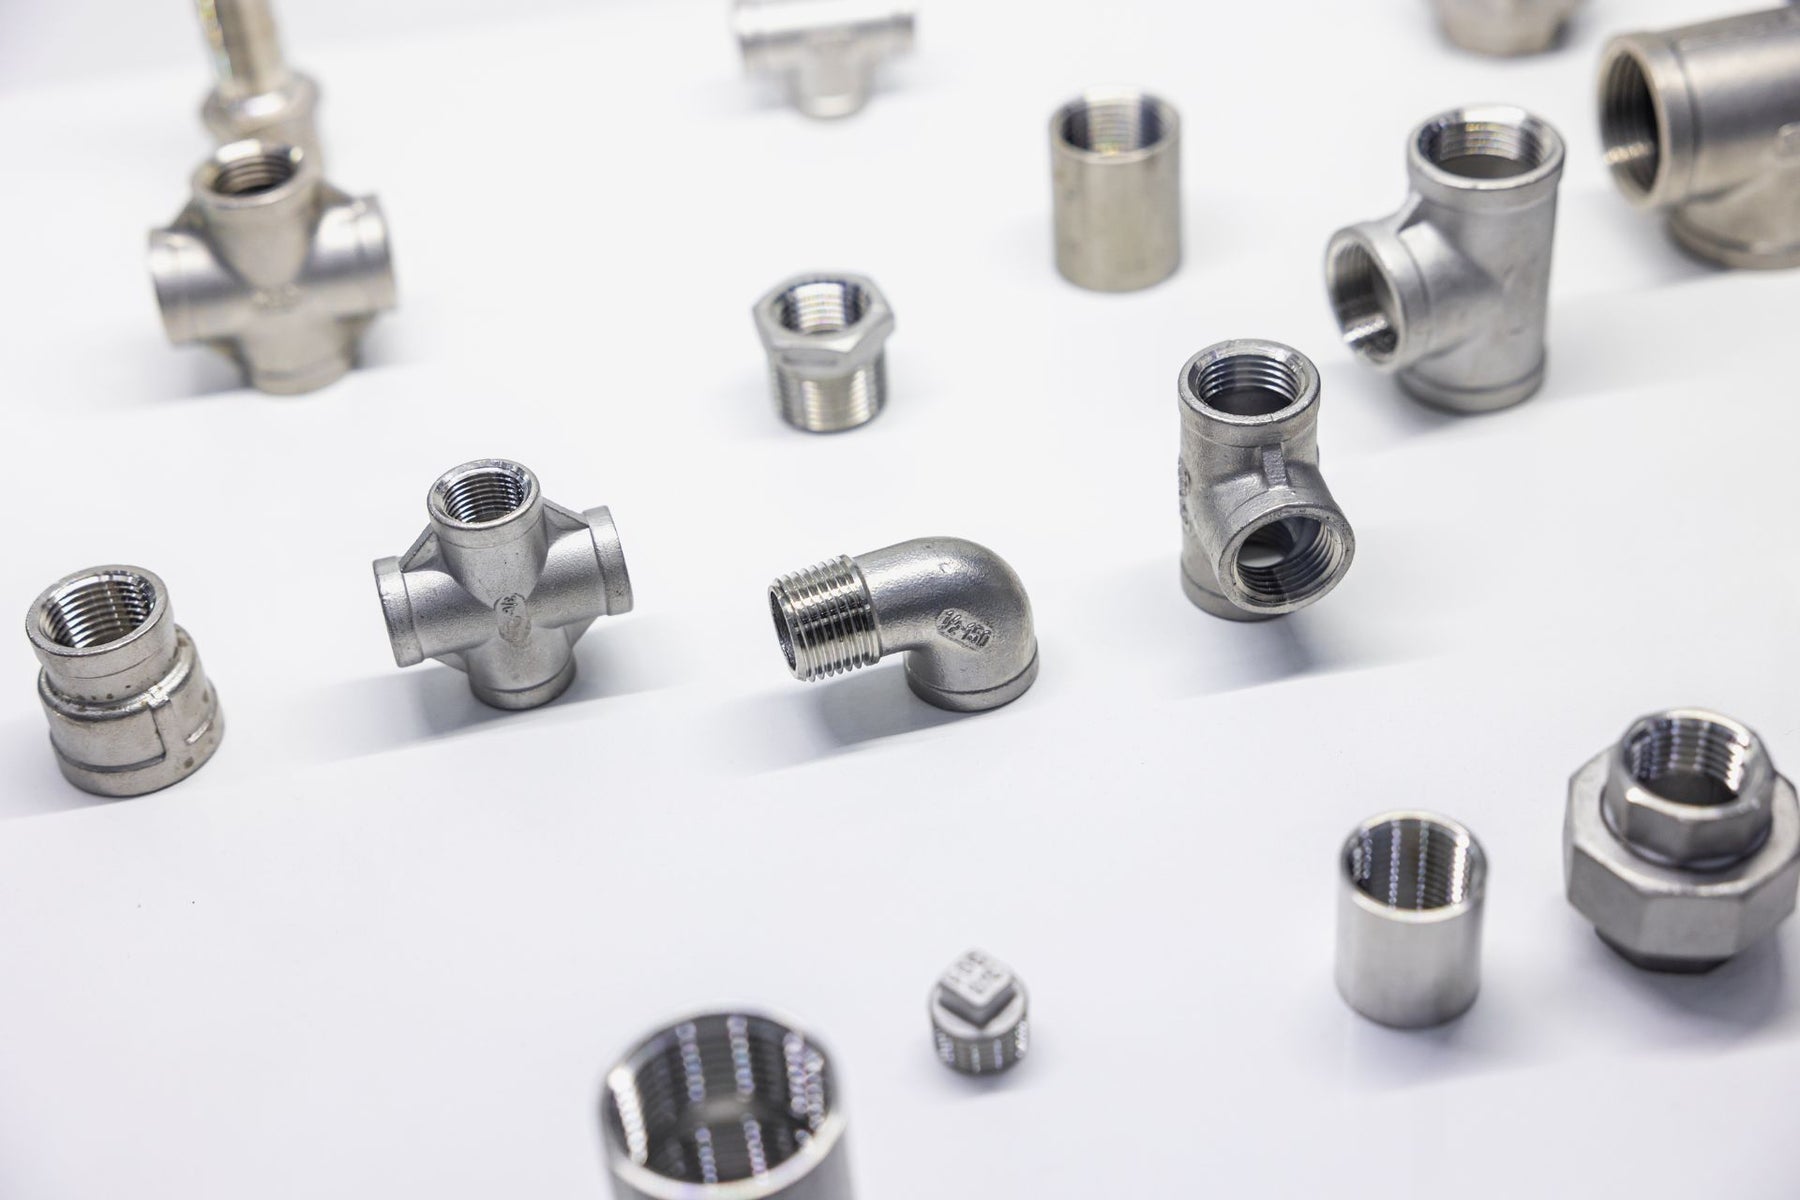 Assorted pipe fittings sprawled on top of a white background